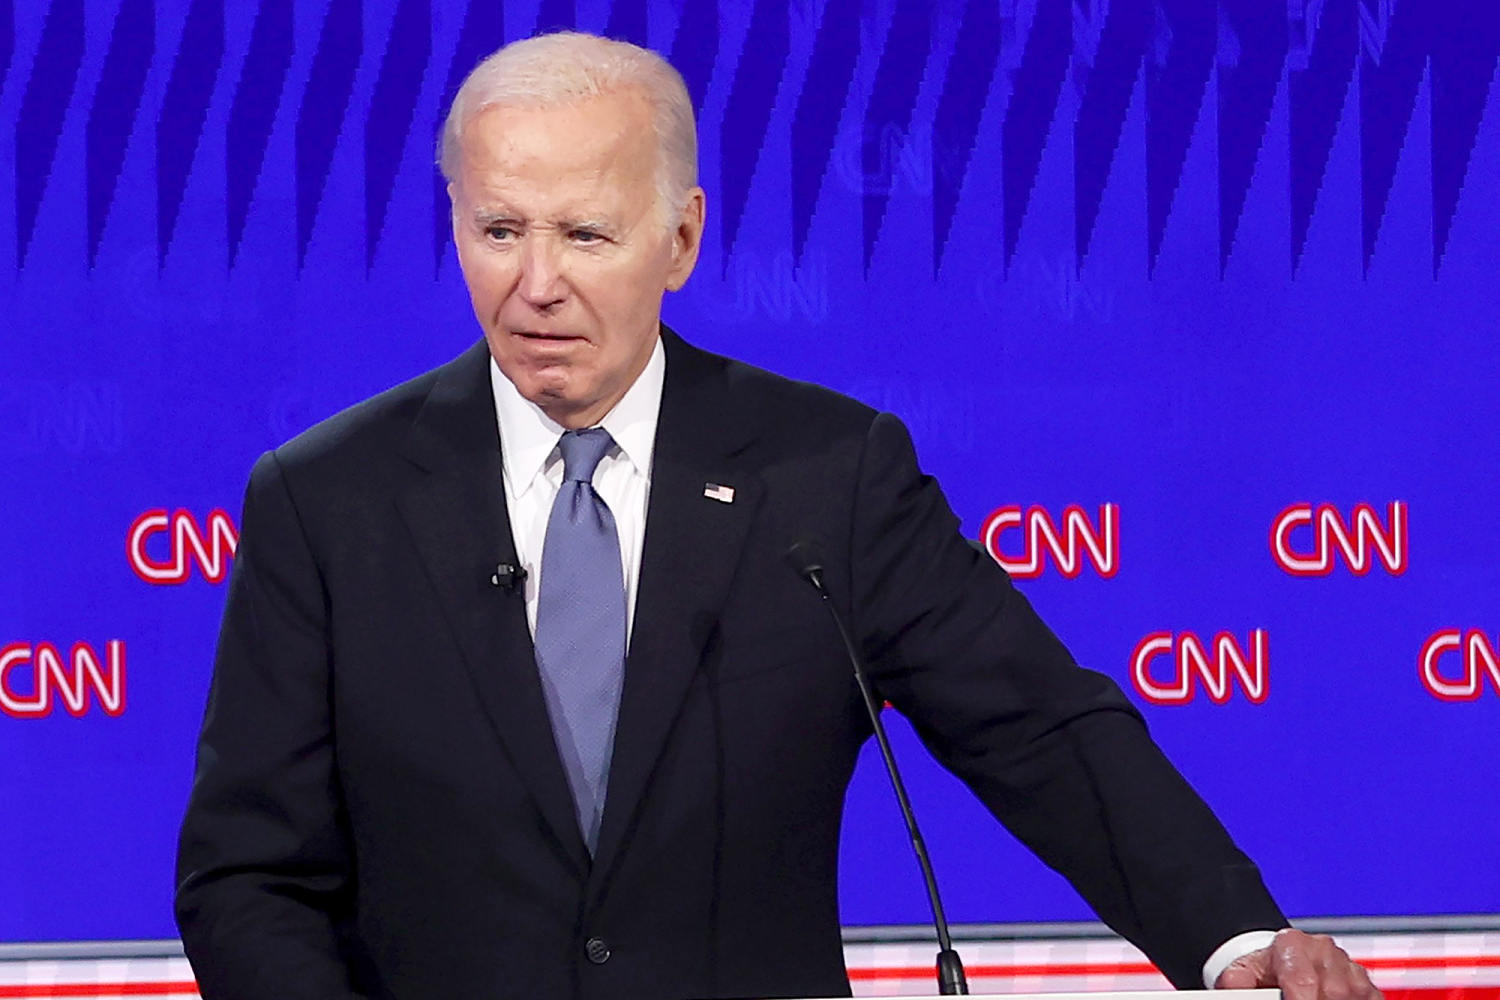 Biden came with facts last night. But facing off with Trump requires something more. 